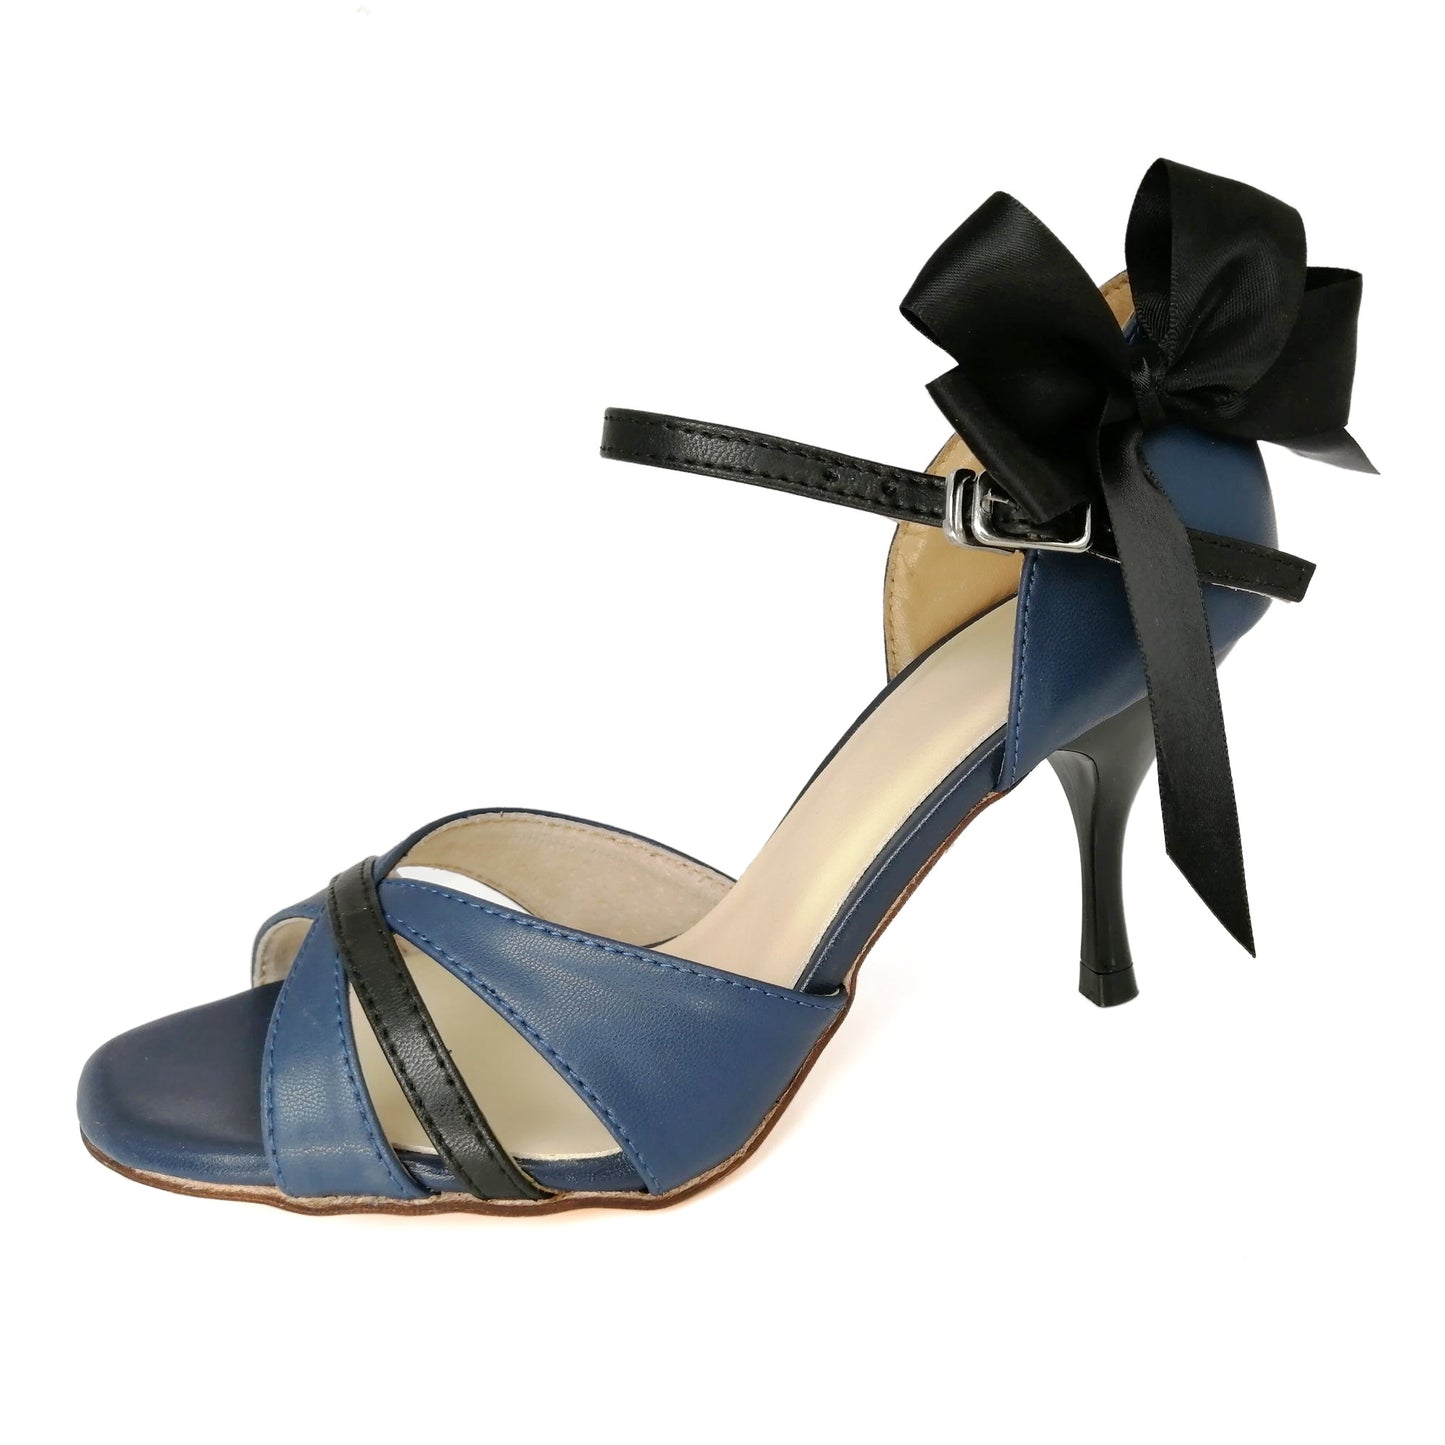 Pro Dancer Women's Argentine Tango Shoes High Heel Dance Sandals Leather Sole Blue and Black (PD9016B)